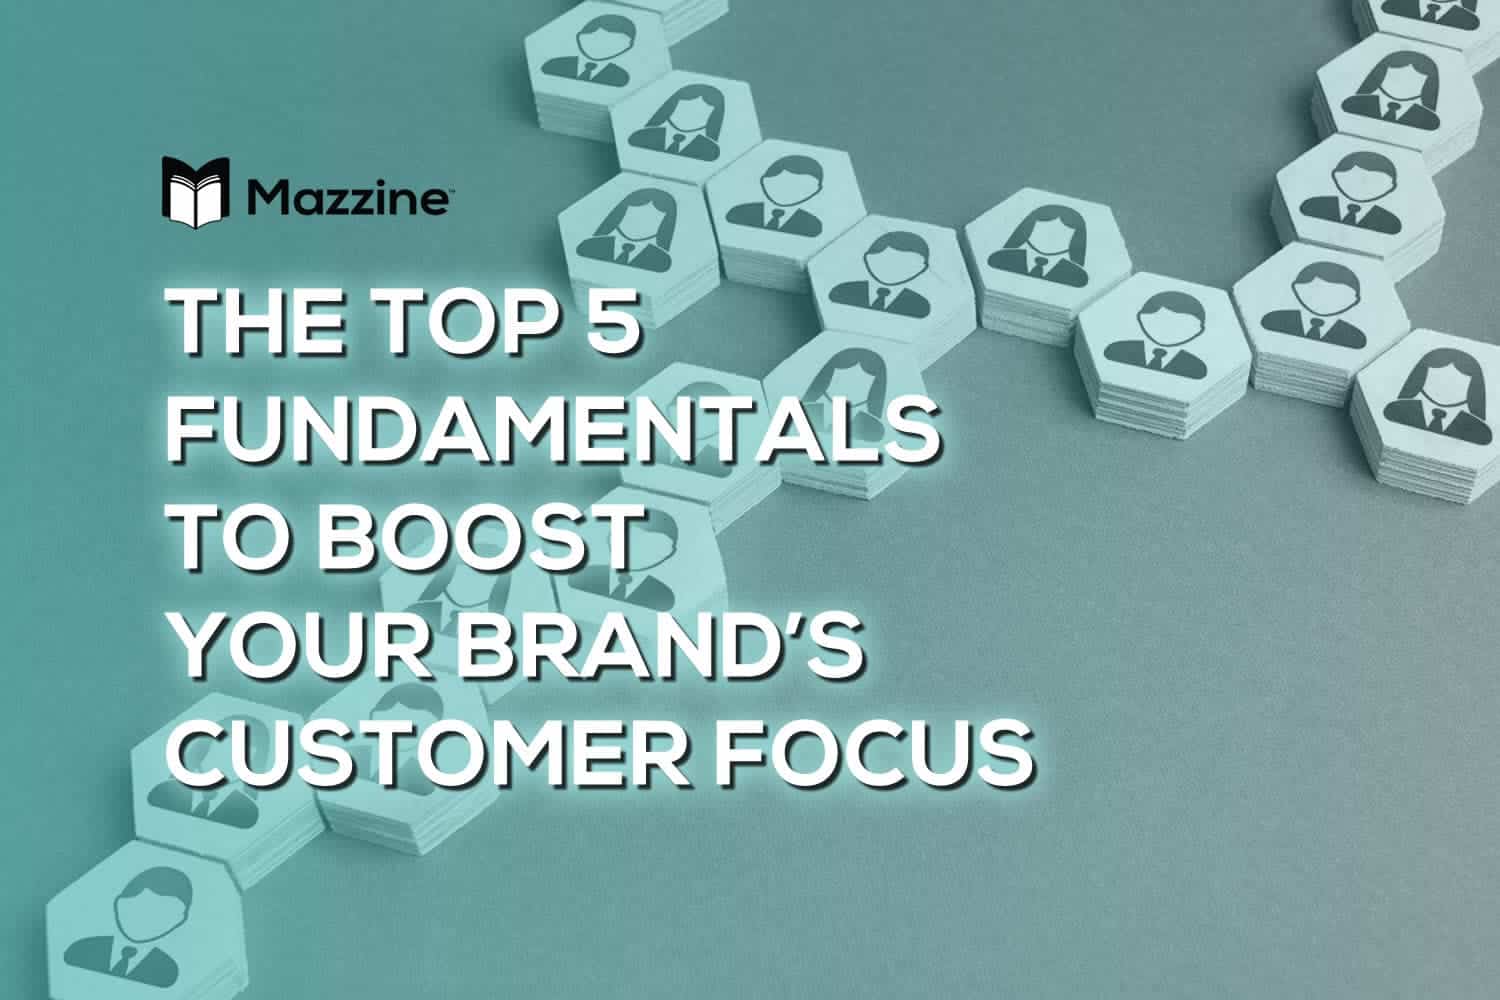 The Top 5 Fundamentals to Boost Your Brand’s Customer Focus